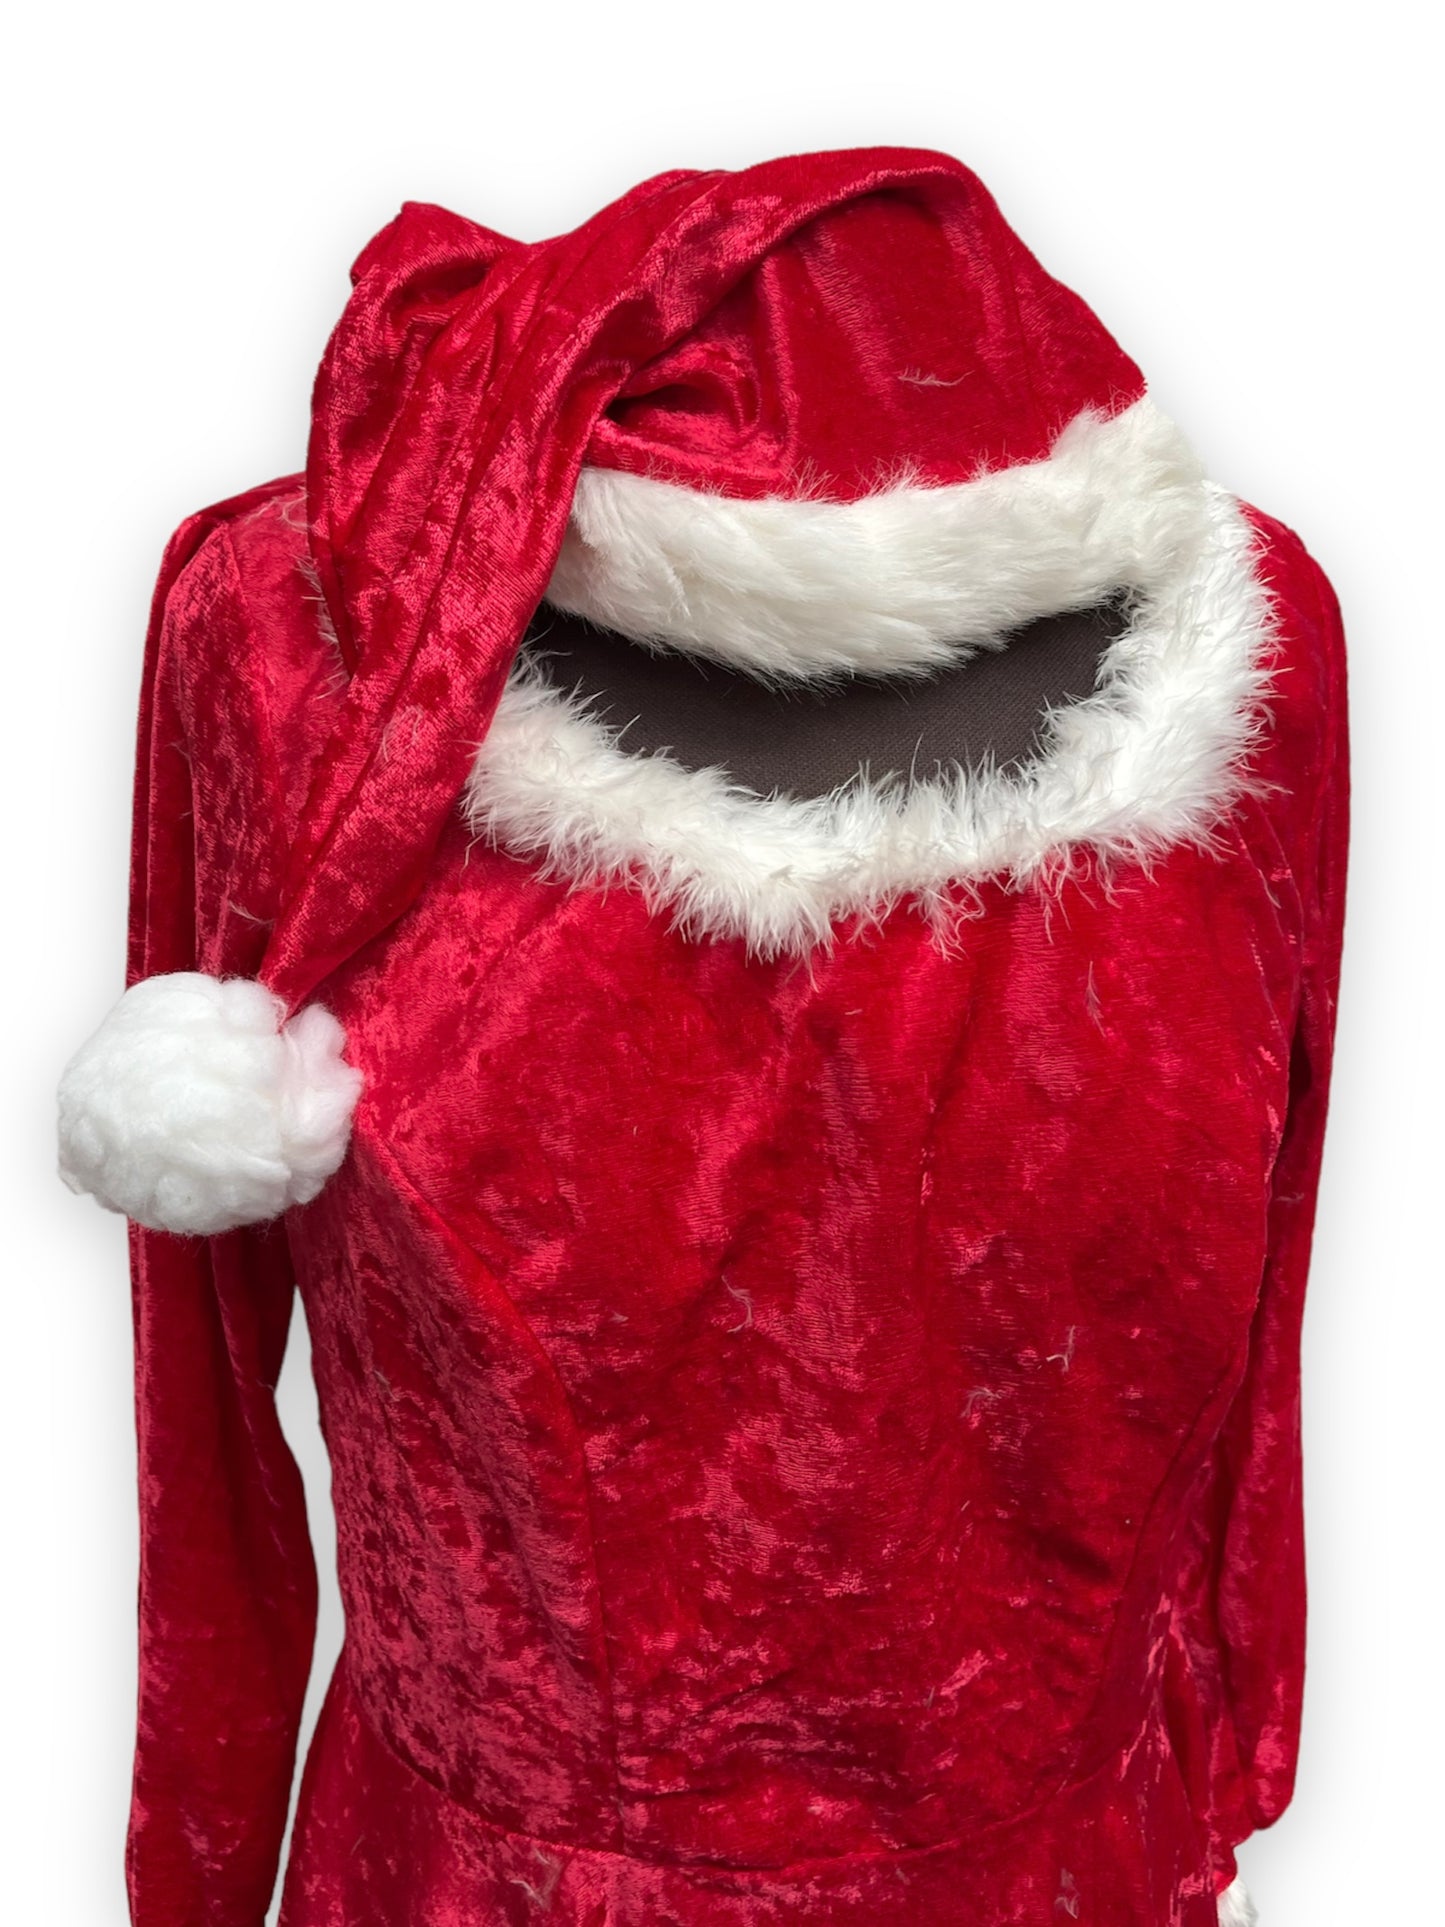 Red Mrs Claus Long Sleeved Christmas outfit Size EUR 40 UK 12 - Ex Hire Fancy Dress Costume